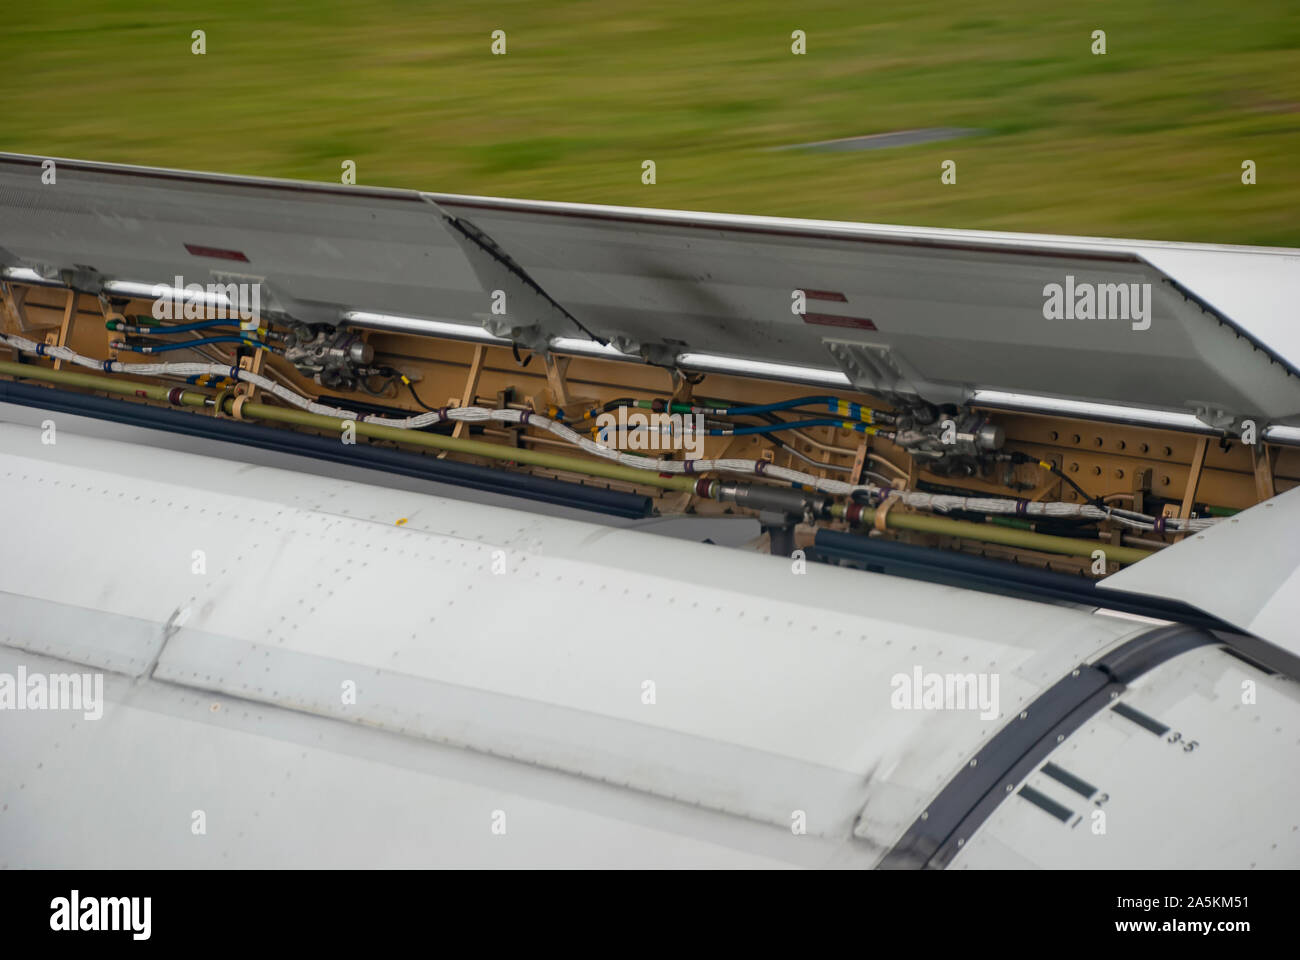 Air brakes and flaps on an aircraft wing as it slows after landing Stock Photo